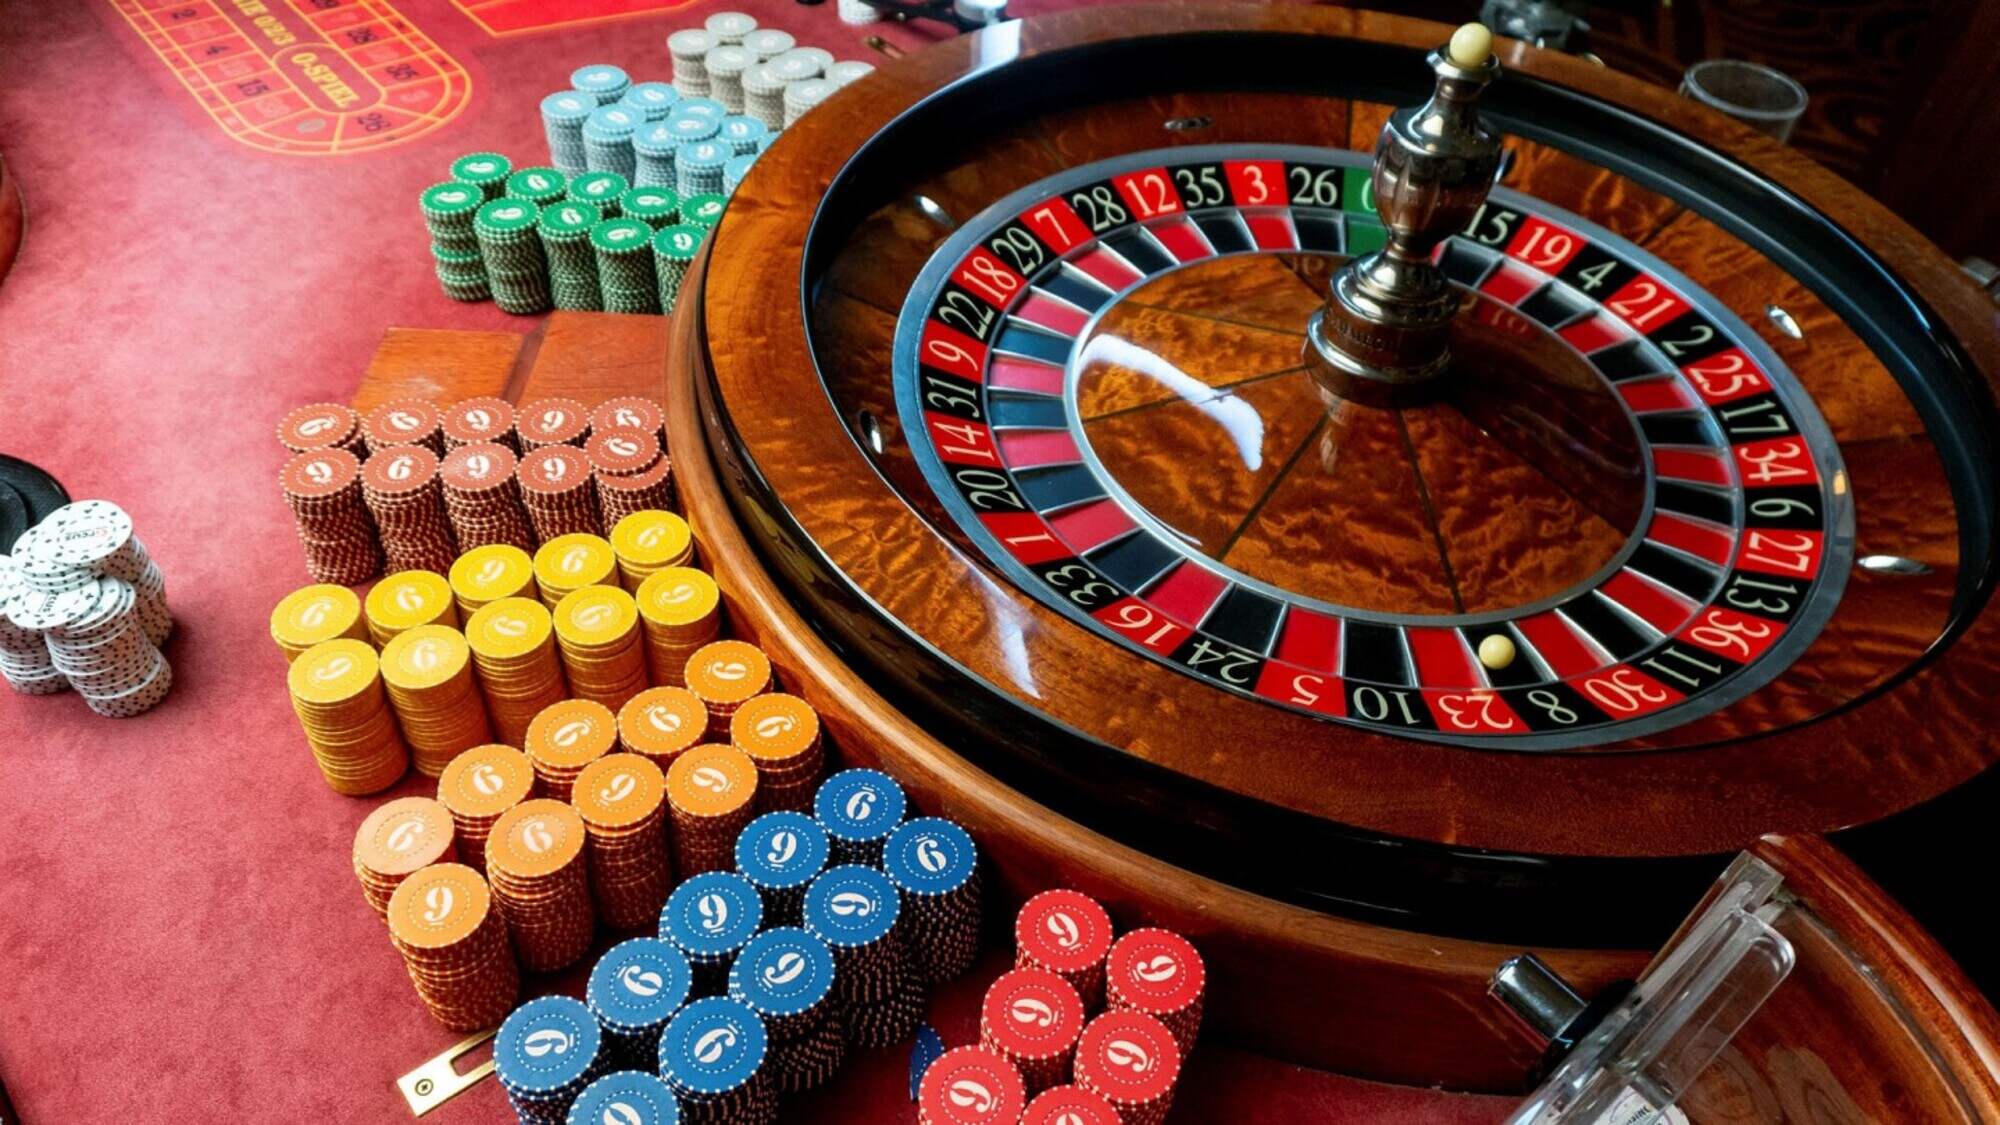 5 Ways to Improve Your Online Casino Experience – A NEWS STORY